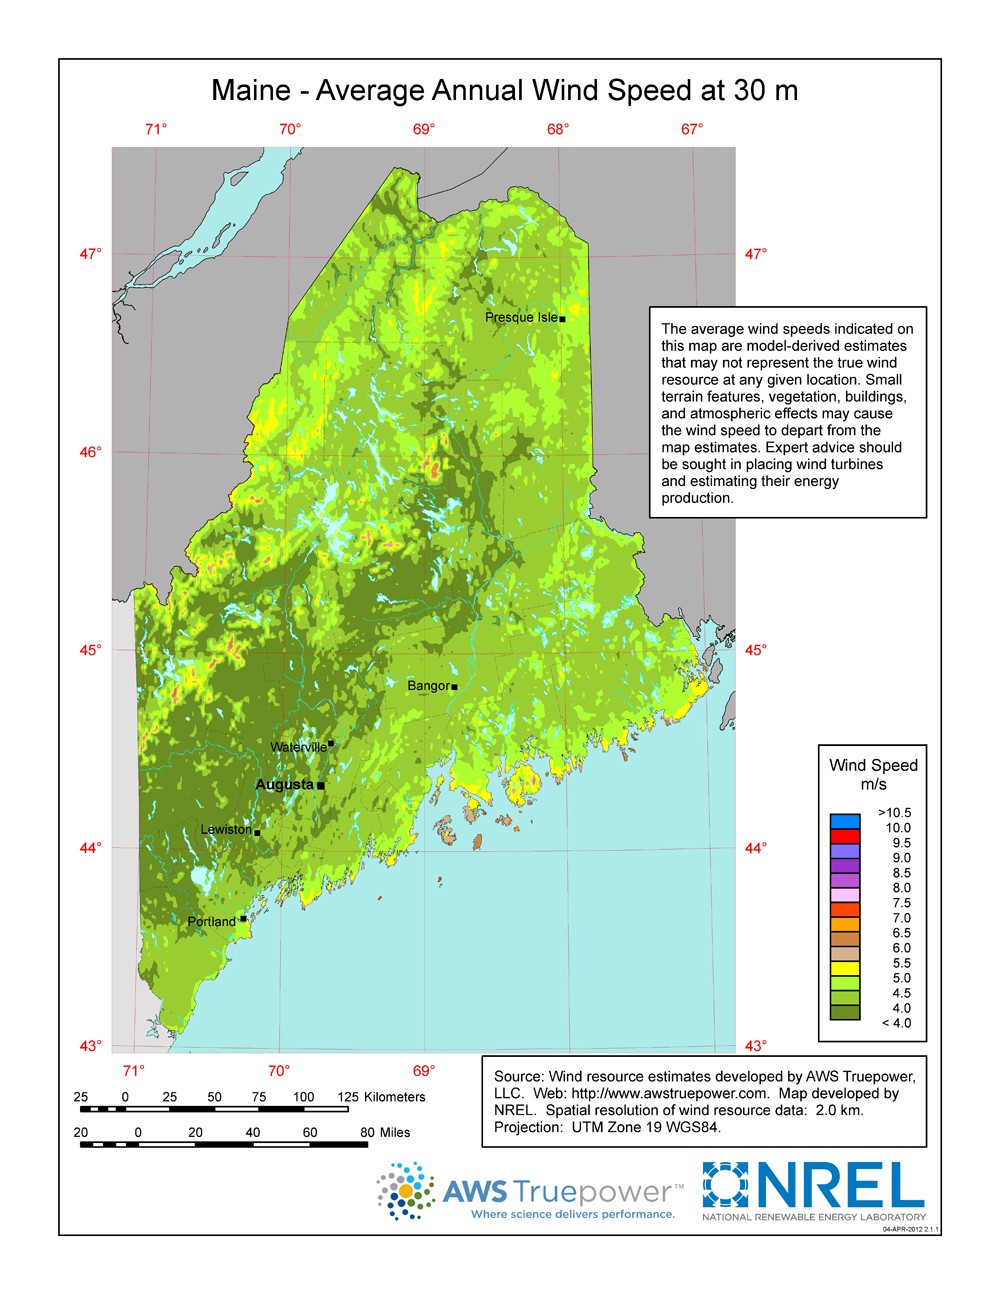 A map of Maine showing wind speeds at a 30-m height.